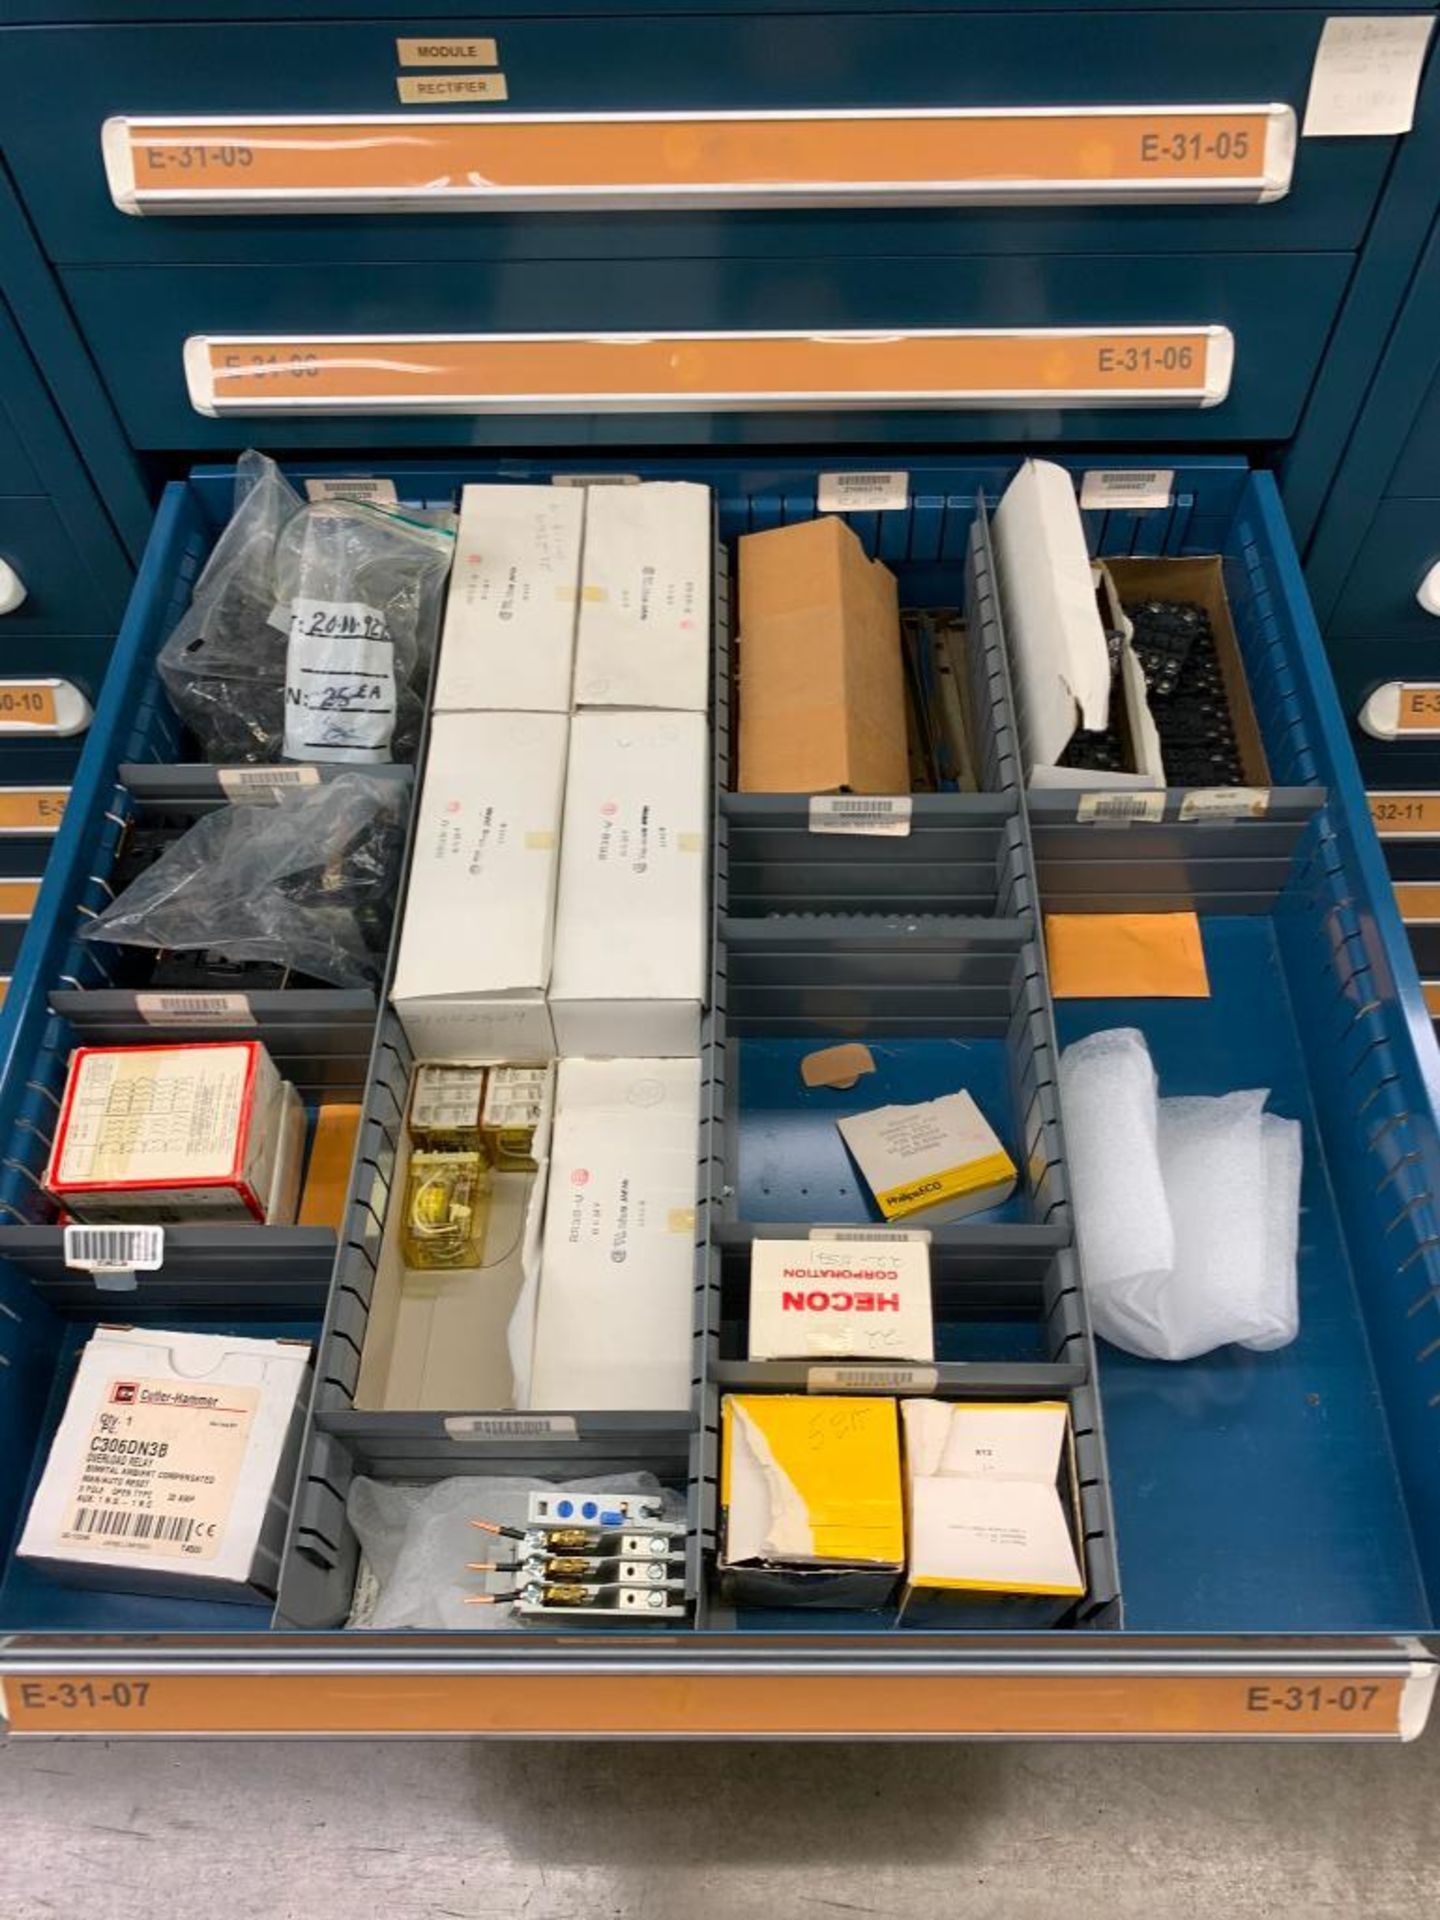 Vidmar 10-Drawer Cabinet w/ Assorted Relays, Connectors, Contactors, Diodes - Image 15 of 31